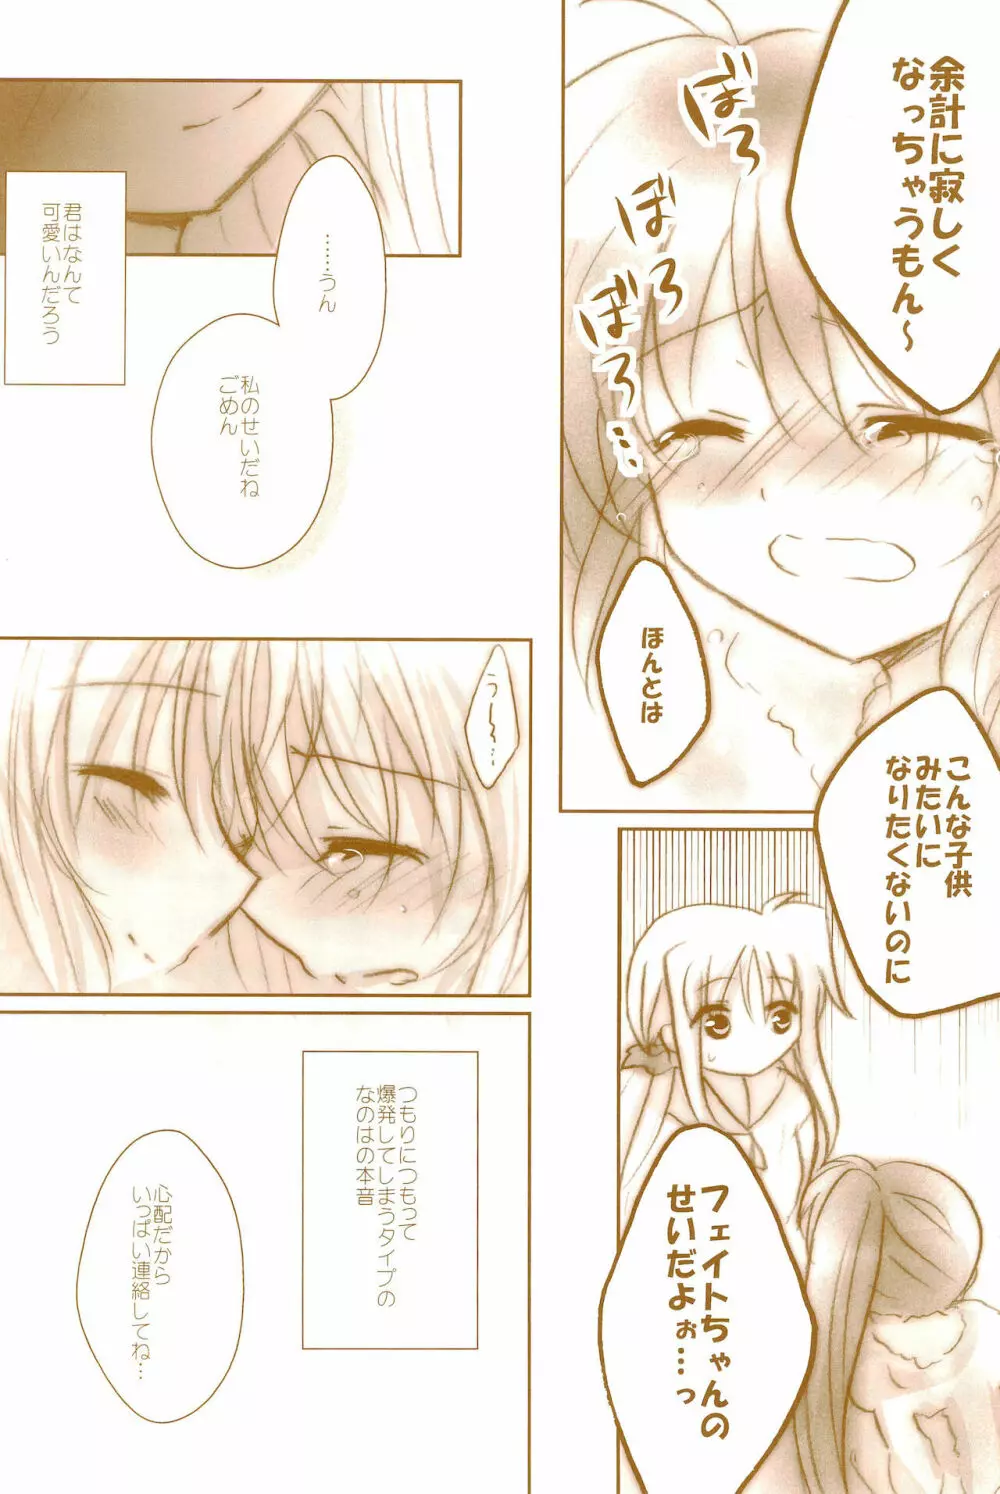 Love Life ～なのフェイなの再録集 3～ - page68